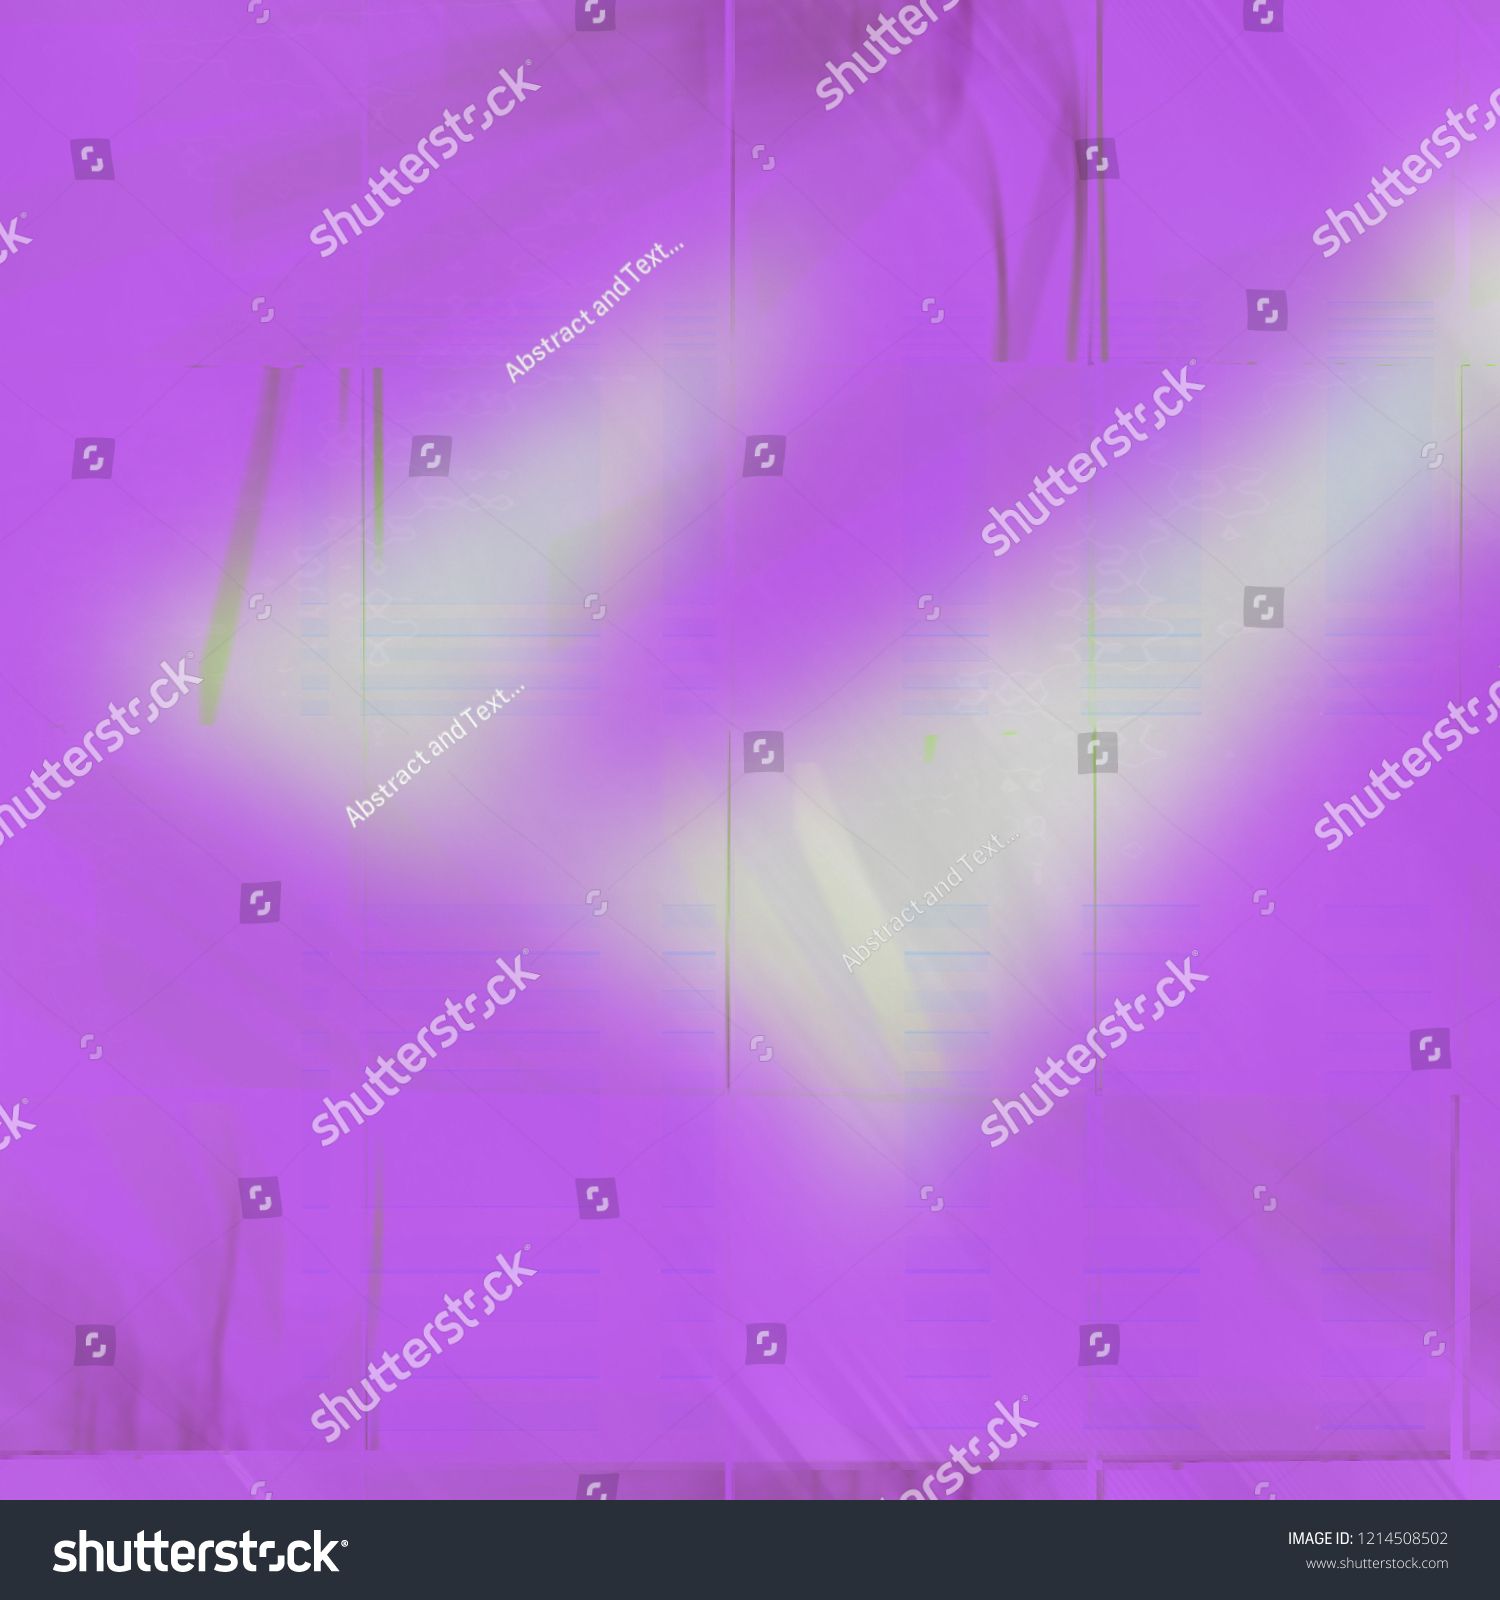 Messy Background And Abnormal Abstract Texture Pattern Design